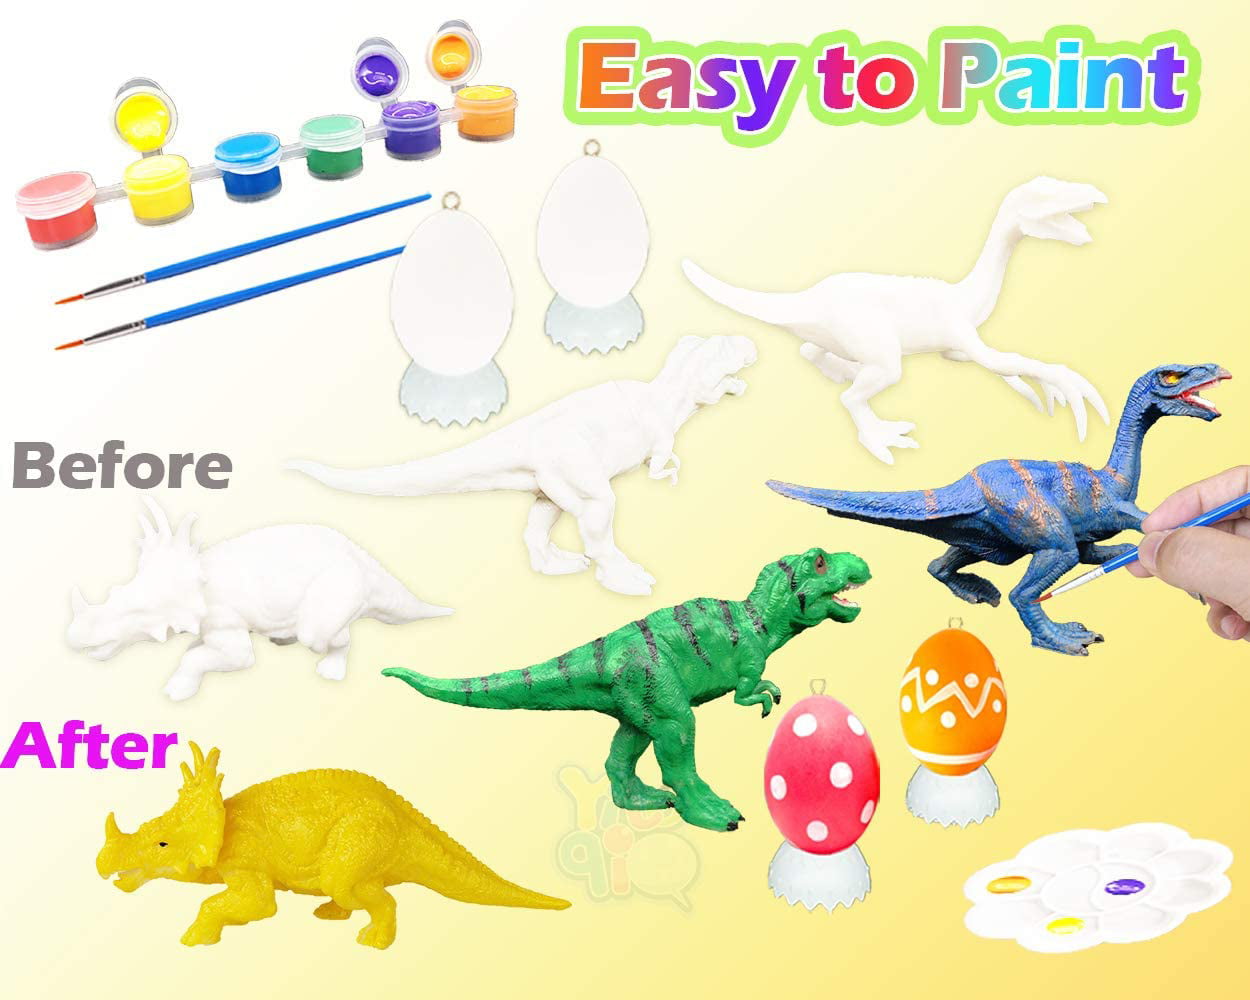 KangoKids Dinosaur Painting Kit for Kids Ages 4-8 with 12 Dinos &  Accessories – Fun & Educational Kids Painting Kit - Paint Your Own Dinosaur  Craft Set - Arts and Crafts for Kids 4-6 : Buy Online at Best Price in KSA  - Souq is now : Toys